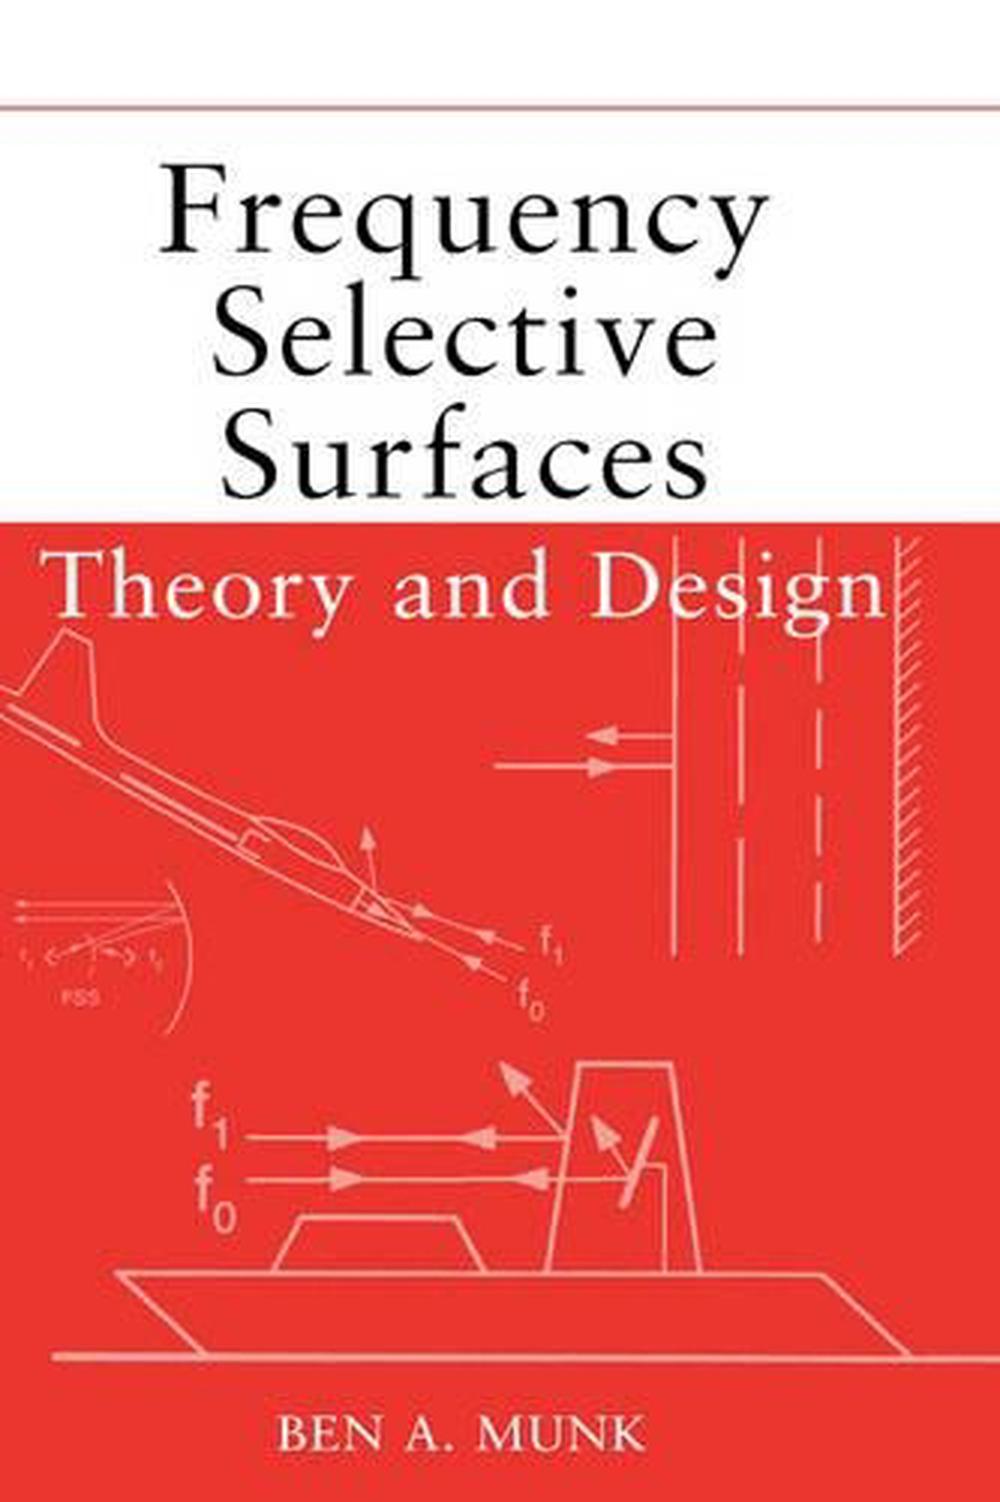 Frequency Selective Surfaces Theory and Design by Ben A. Munk (English